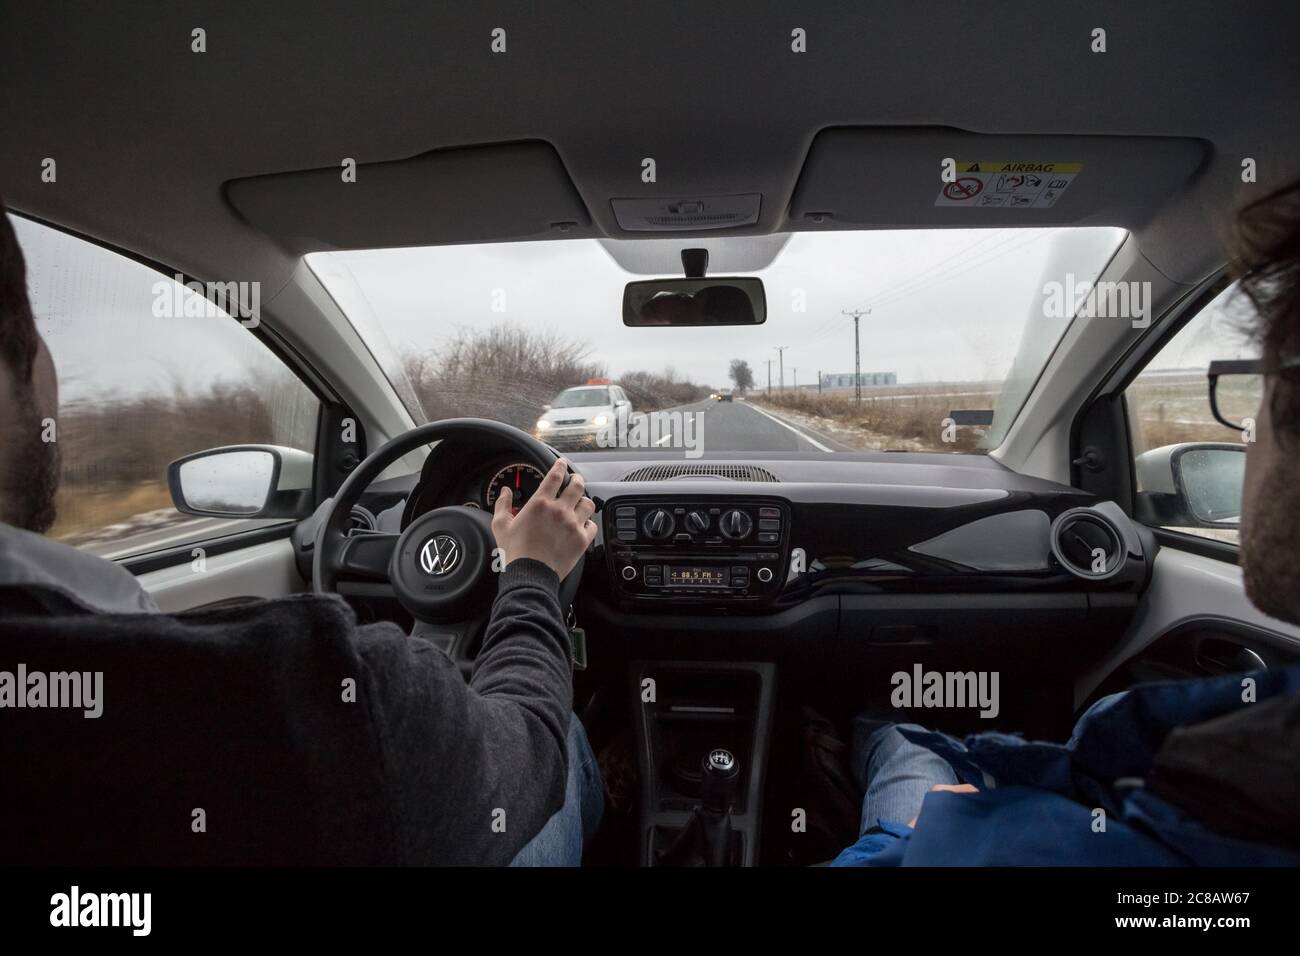 TIMISOARA, ROMANIA - JANUARY 14, 2017: Man driving a Volkswagen car with its logo, hands on the steering wheel, with a friend as a copilot and a stere Stock Photo